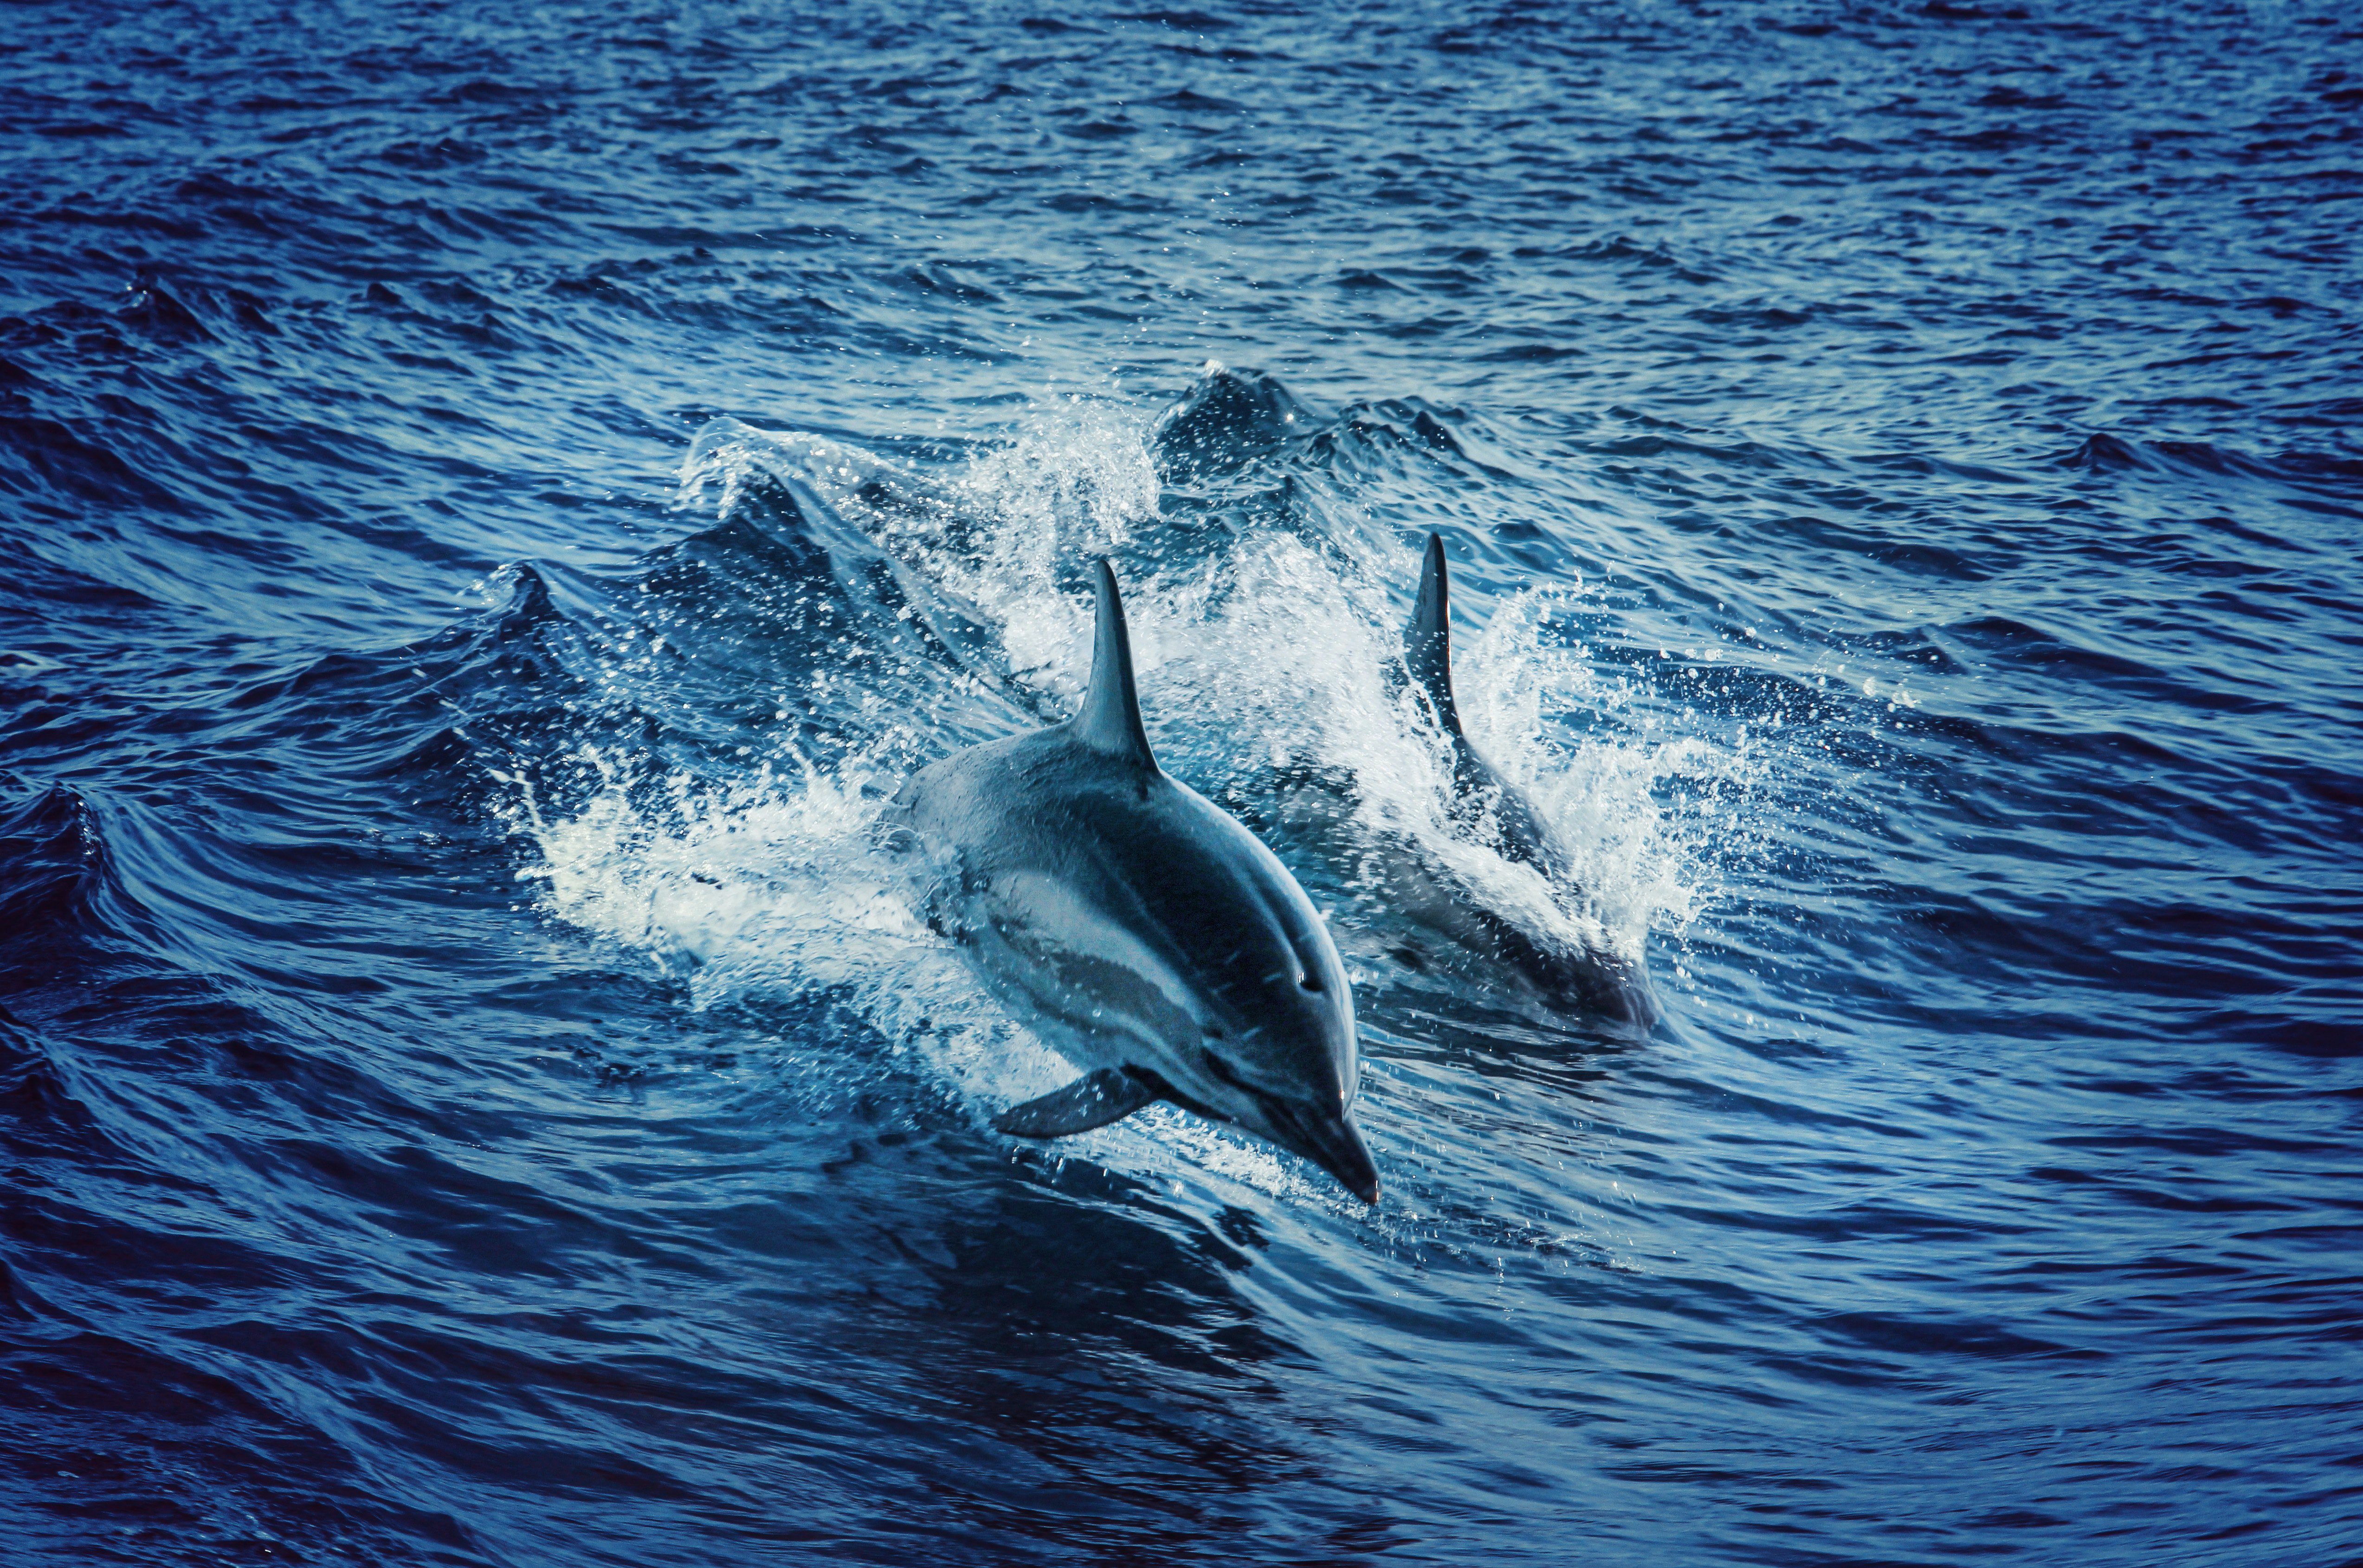 Two dolphins swimming gracefully in the vast ocean gliding through the water.